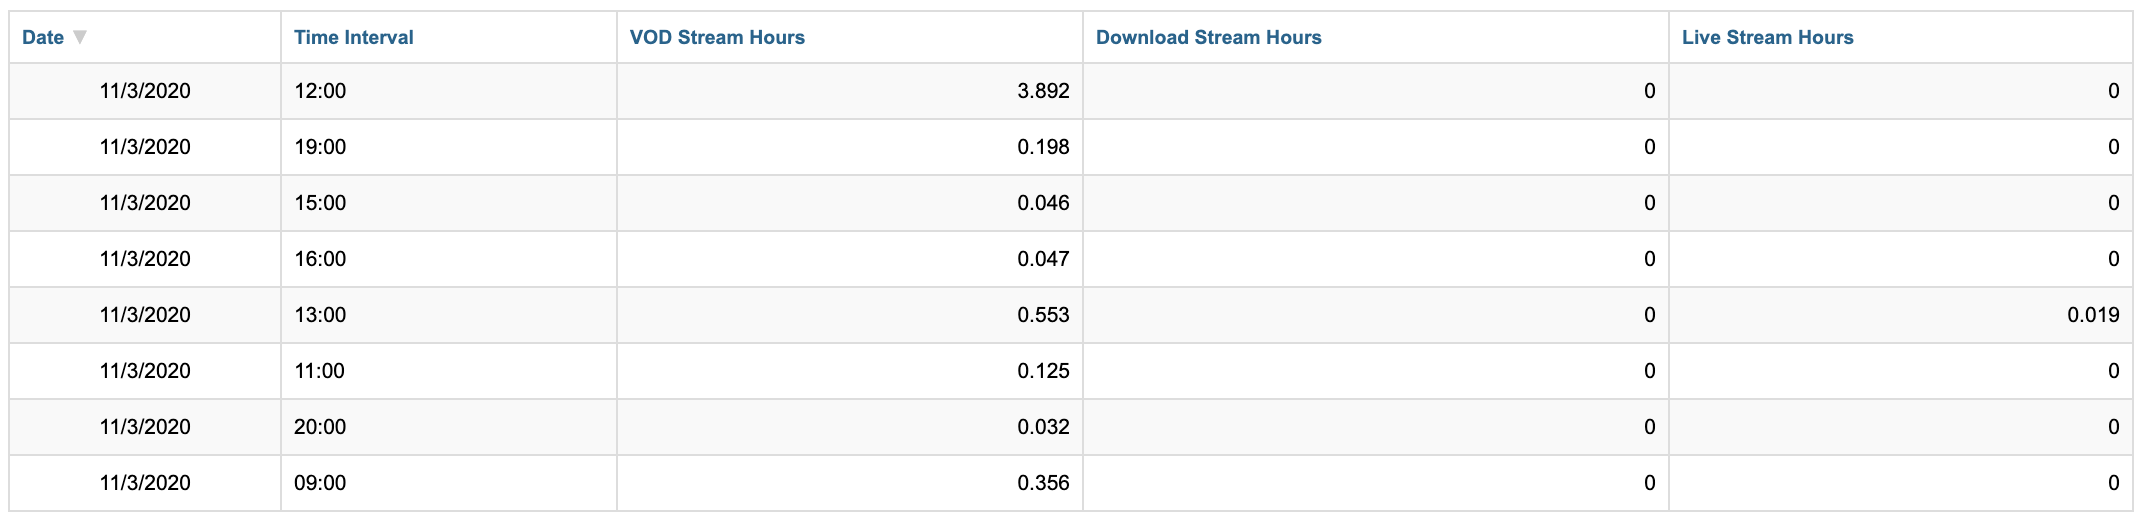 total-stream-hours_hourly-table.png